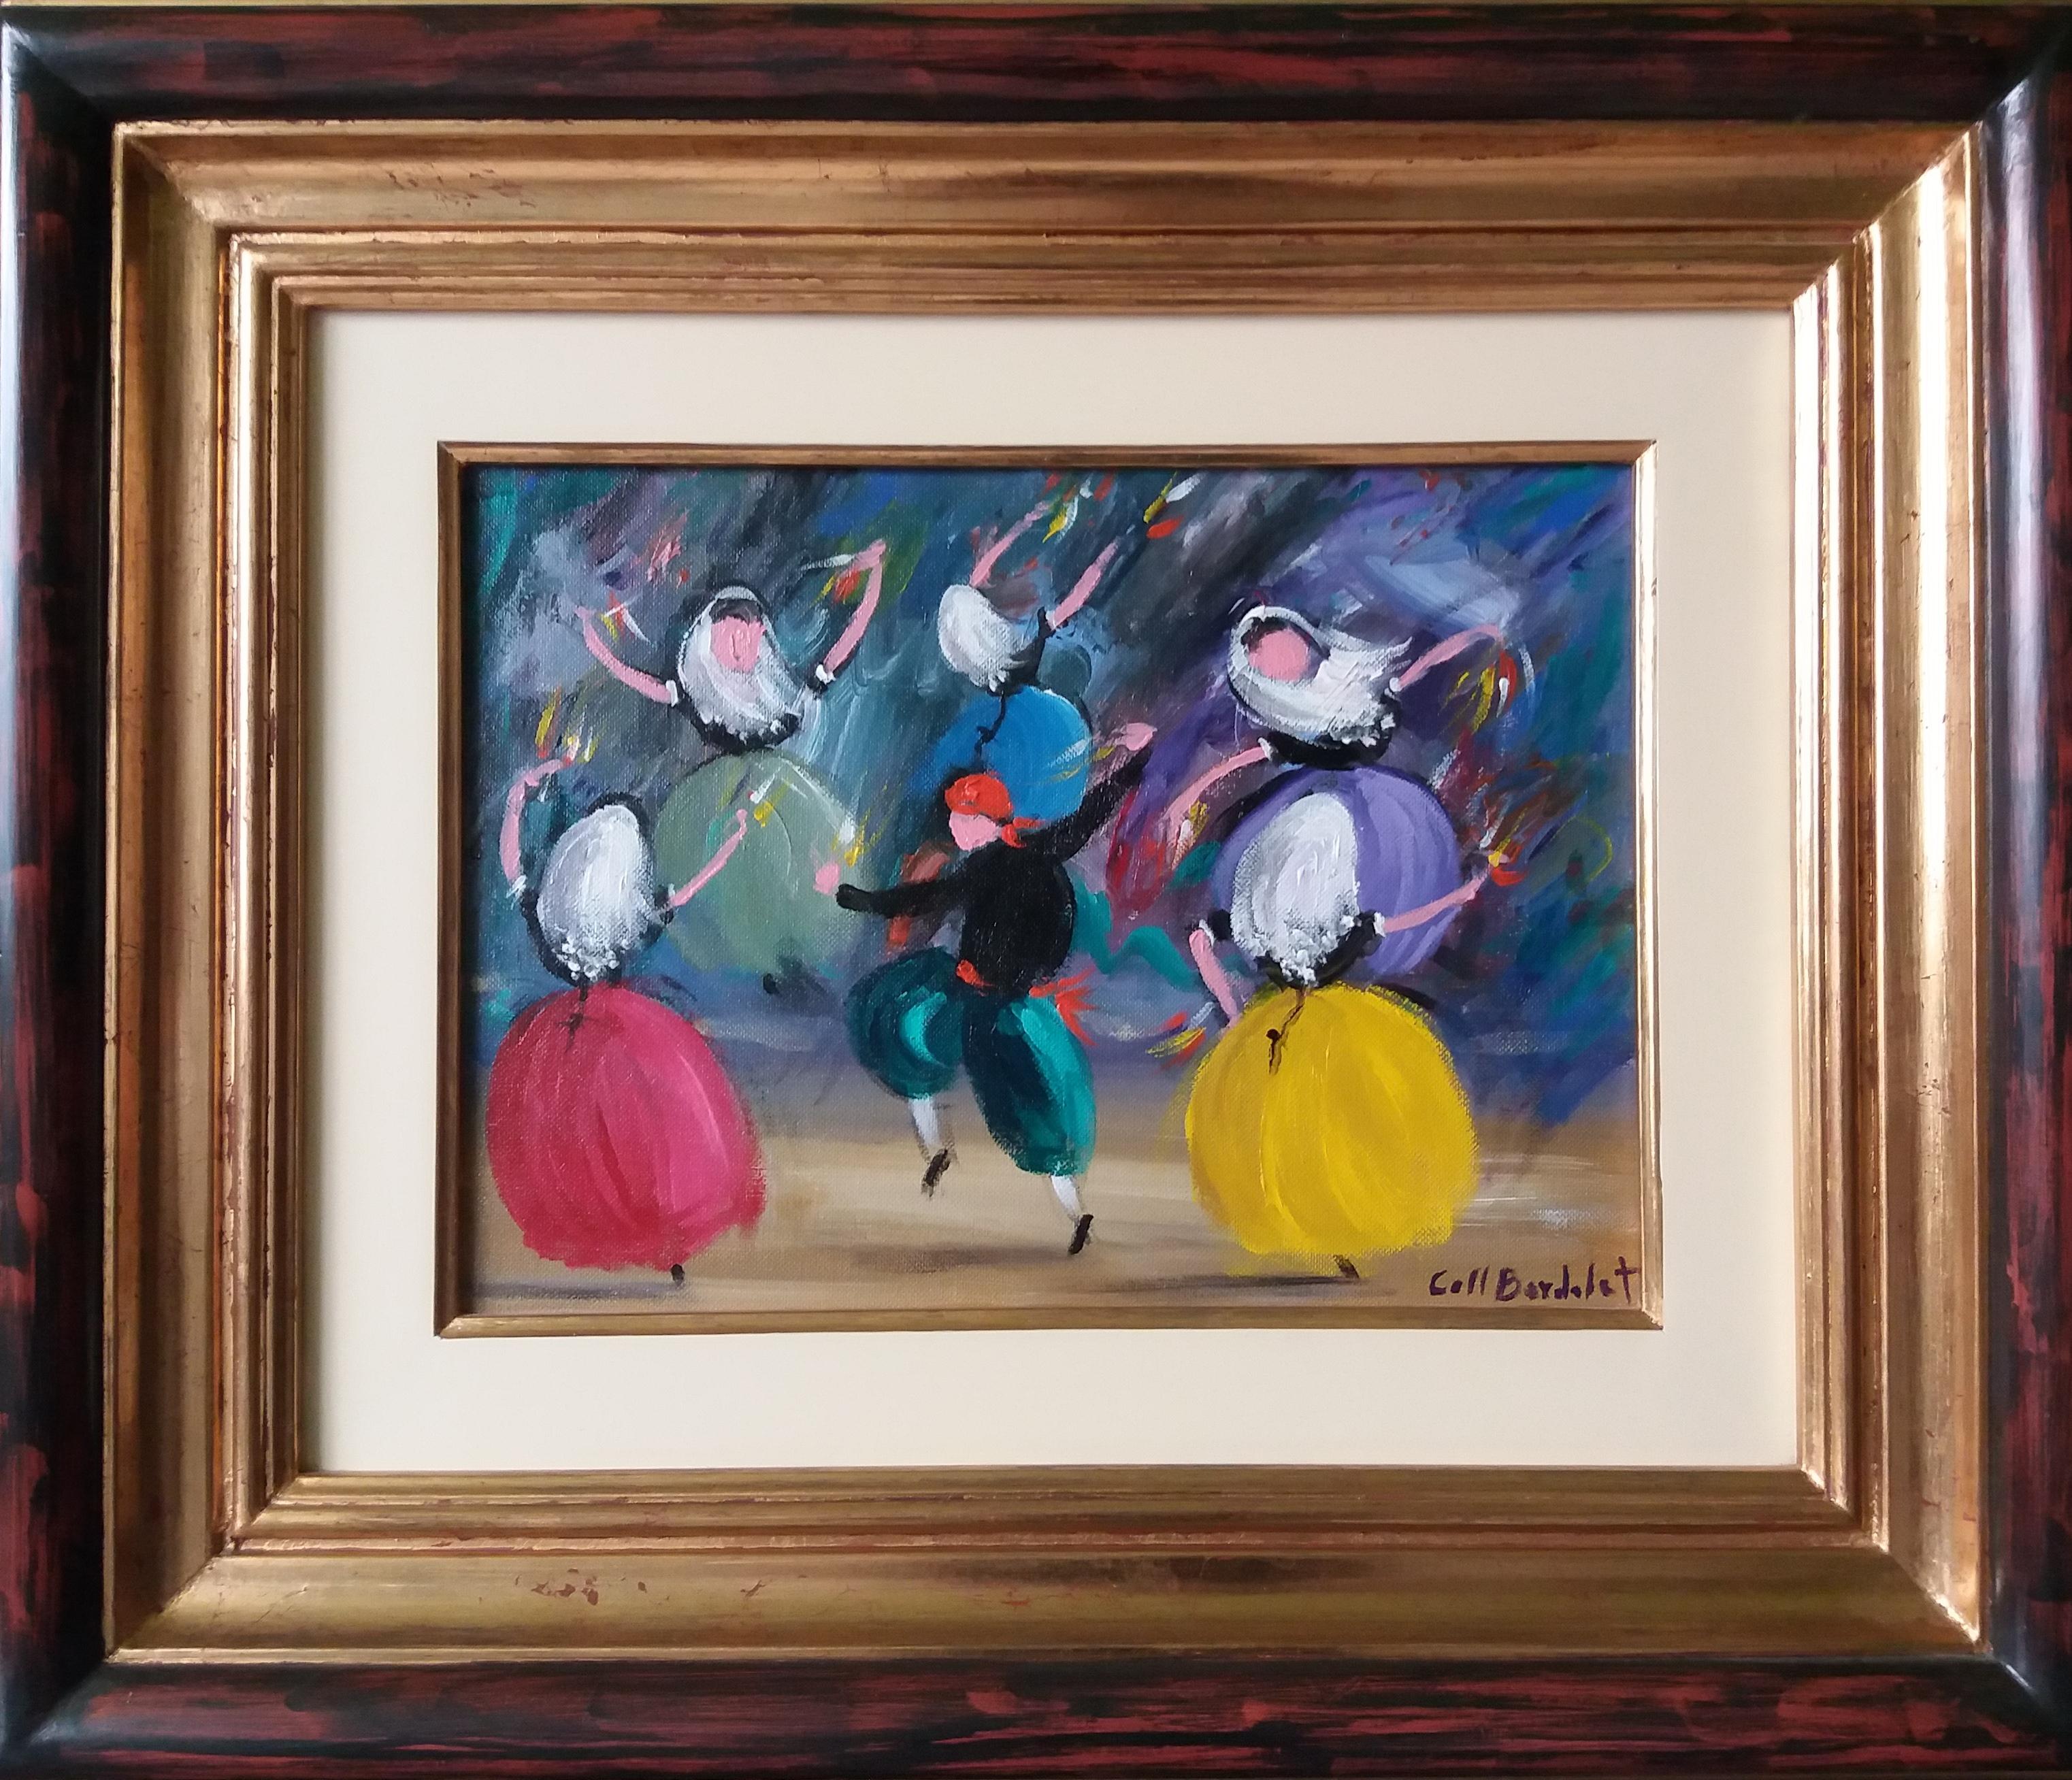  Coll Bardolet  Typical Mallorcan Dance. original expressionist acrylic painting For Sale 1